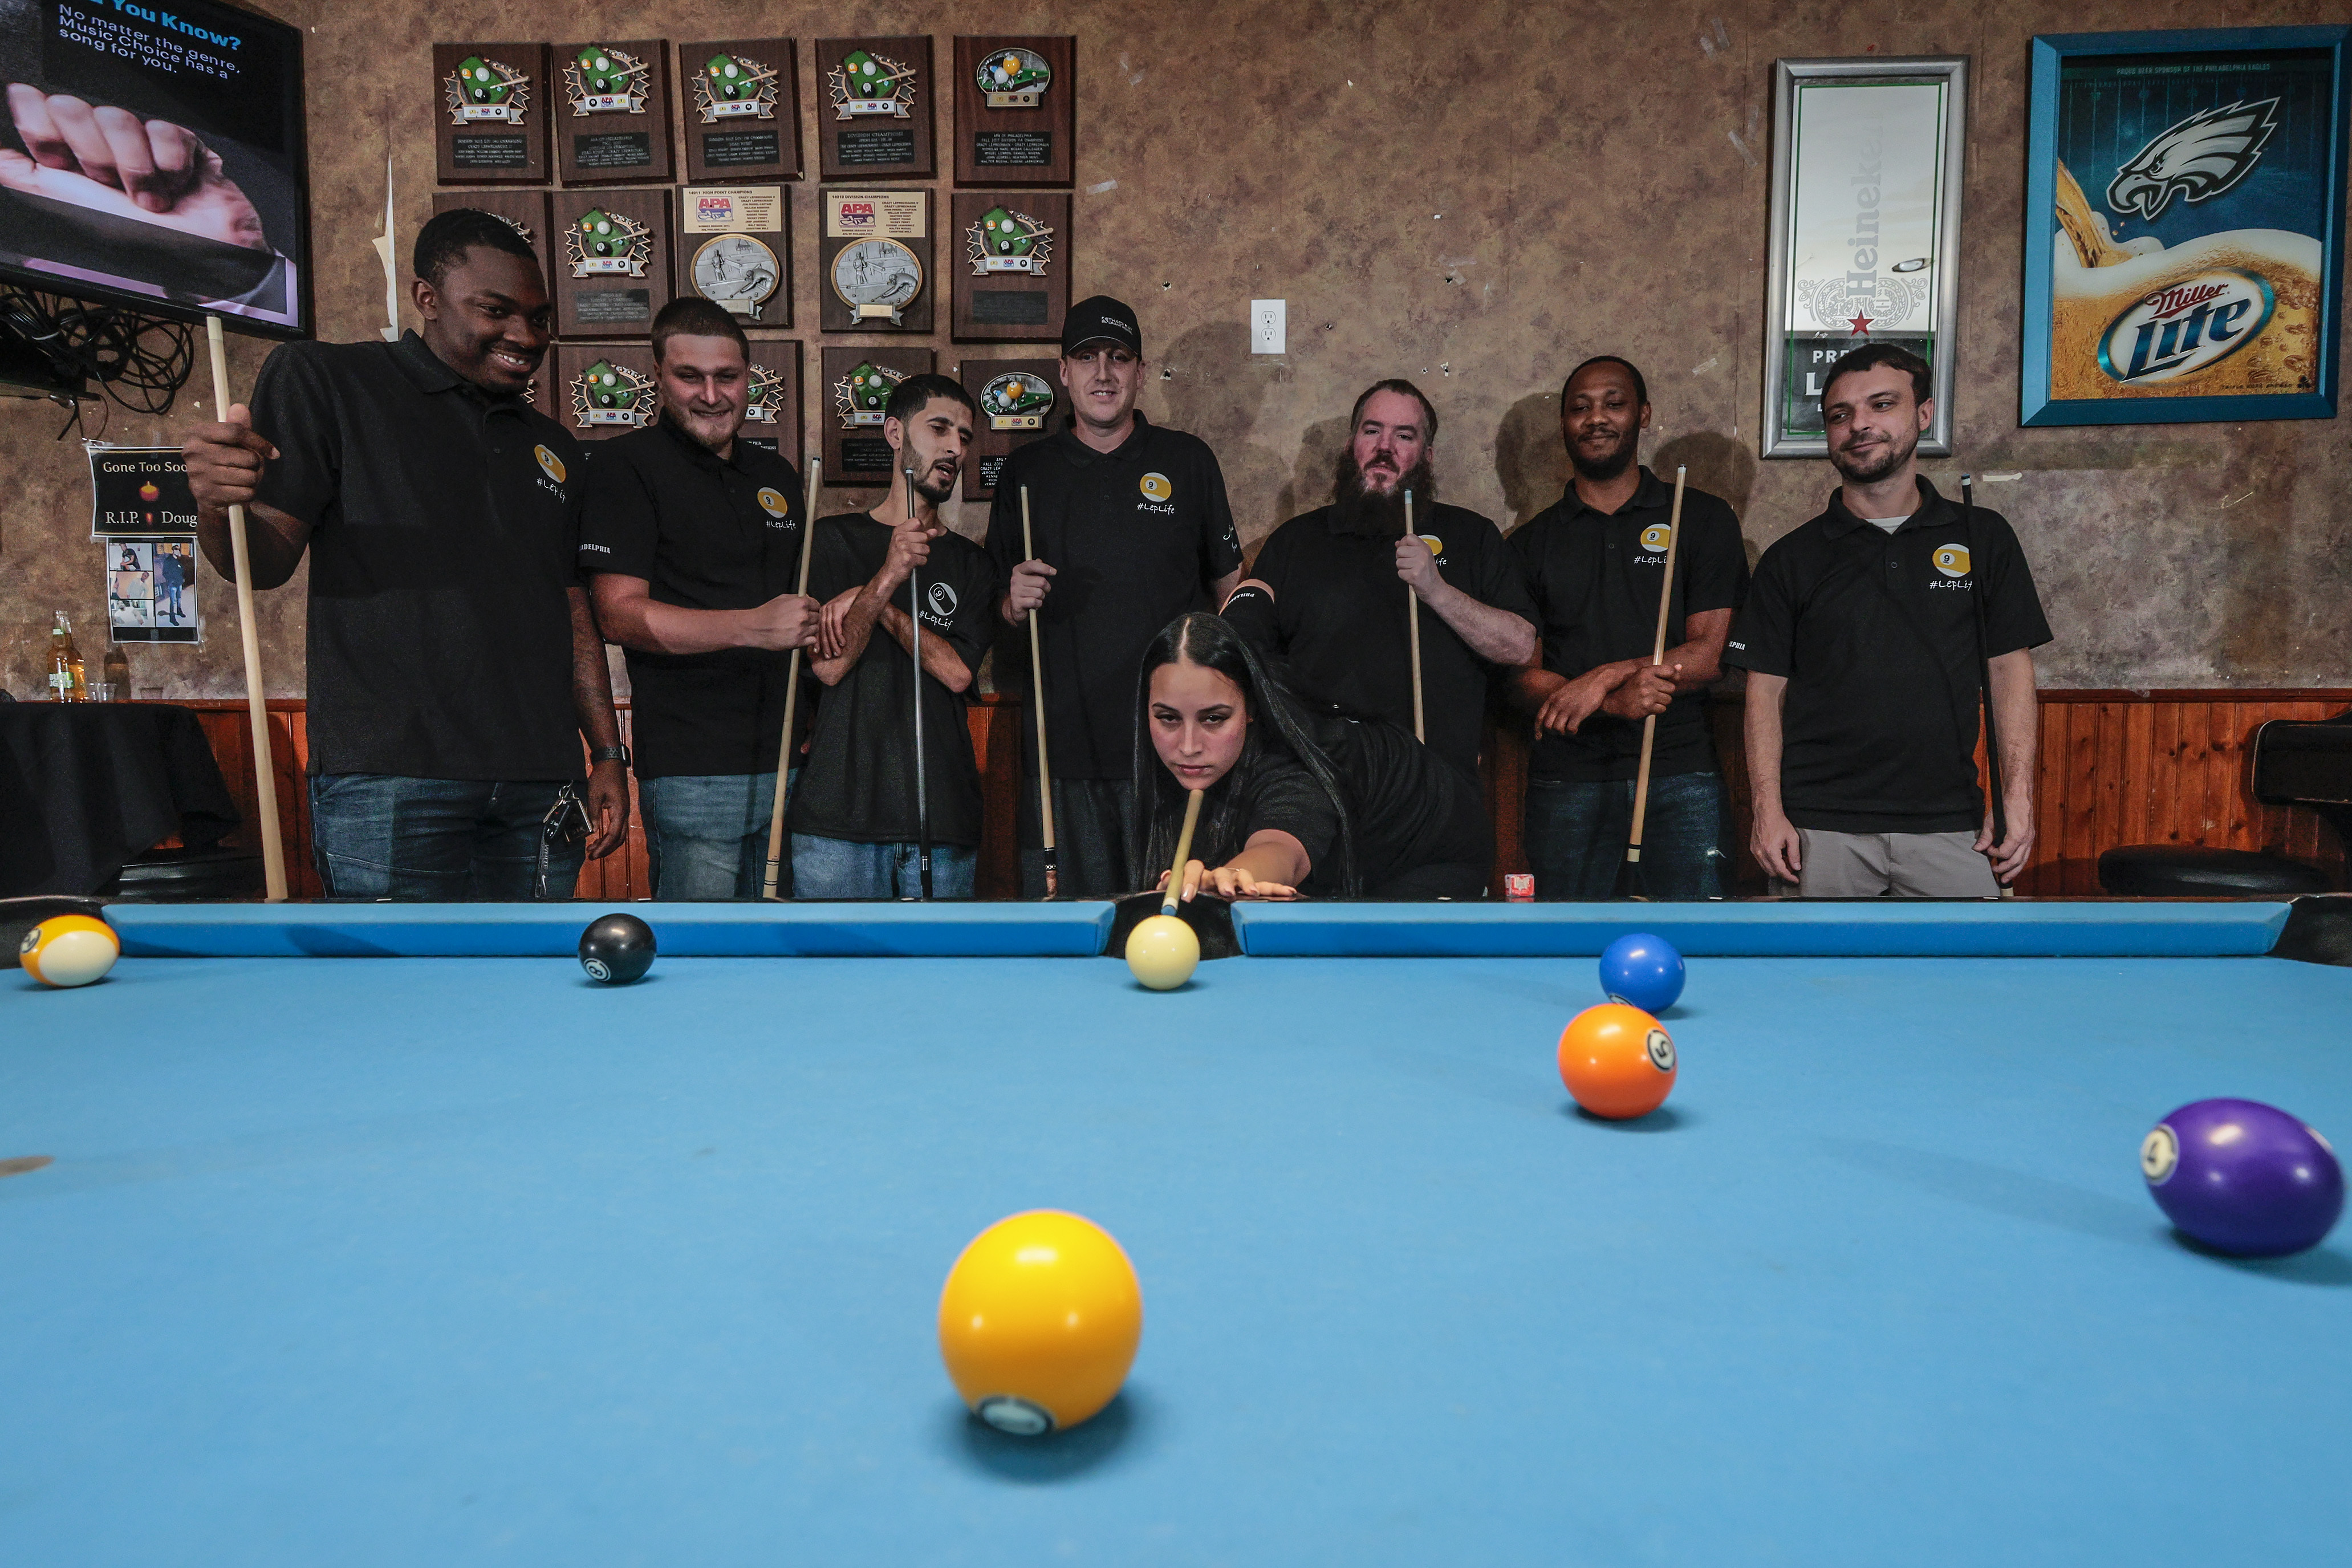 Philly comes in first at the World Pool Championship in Las Vegas